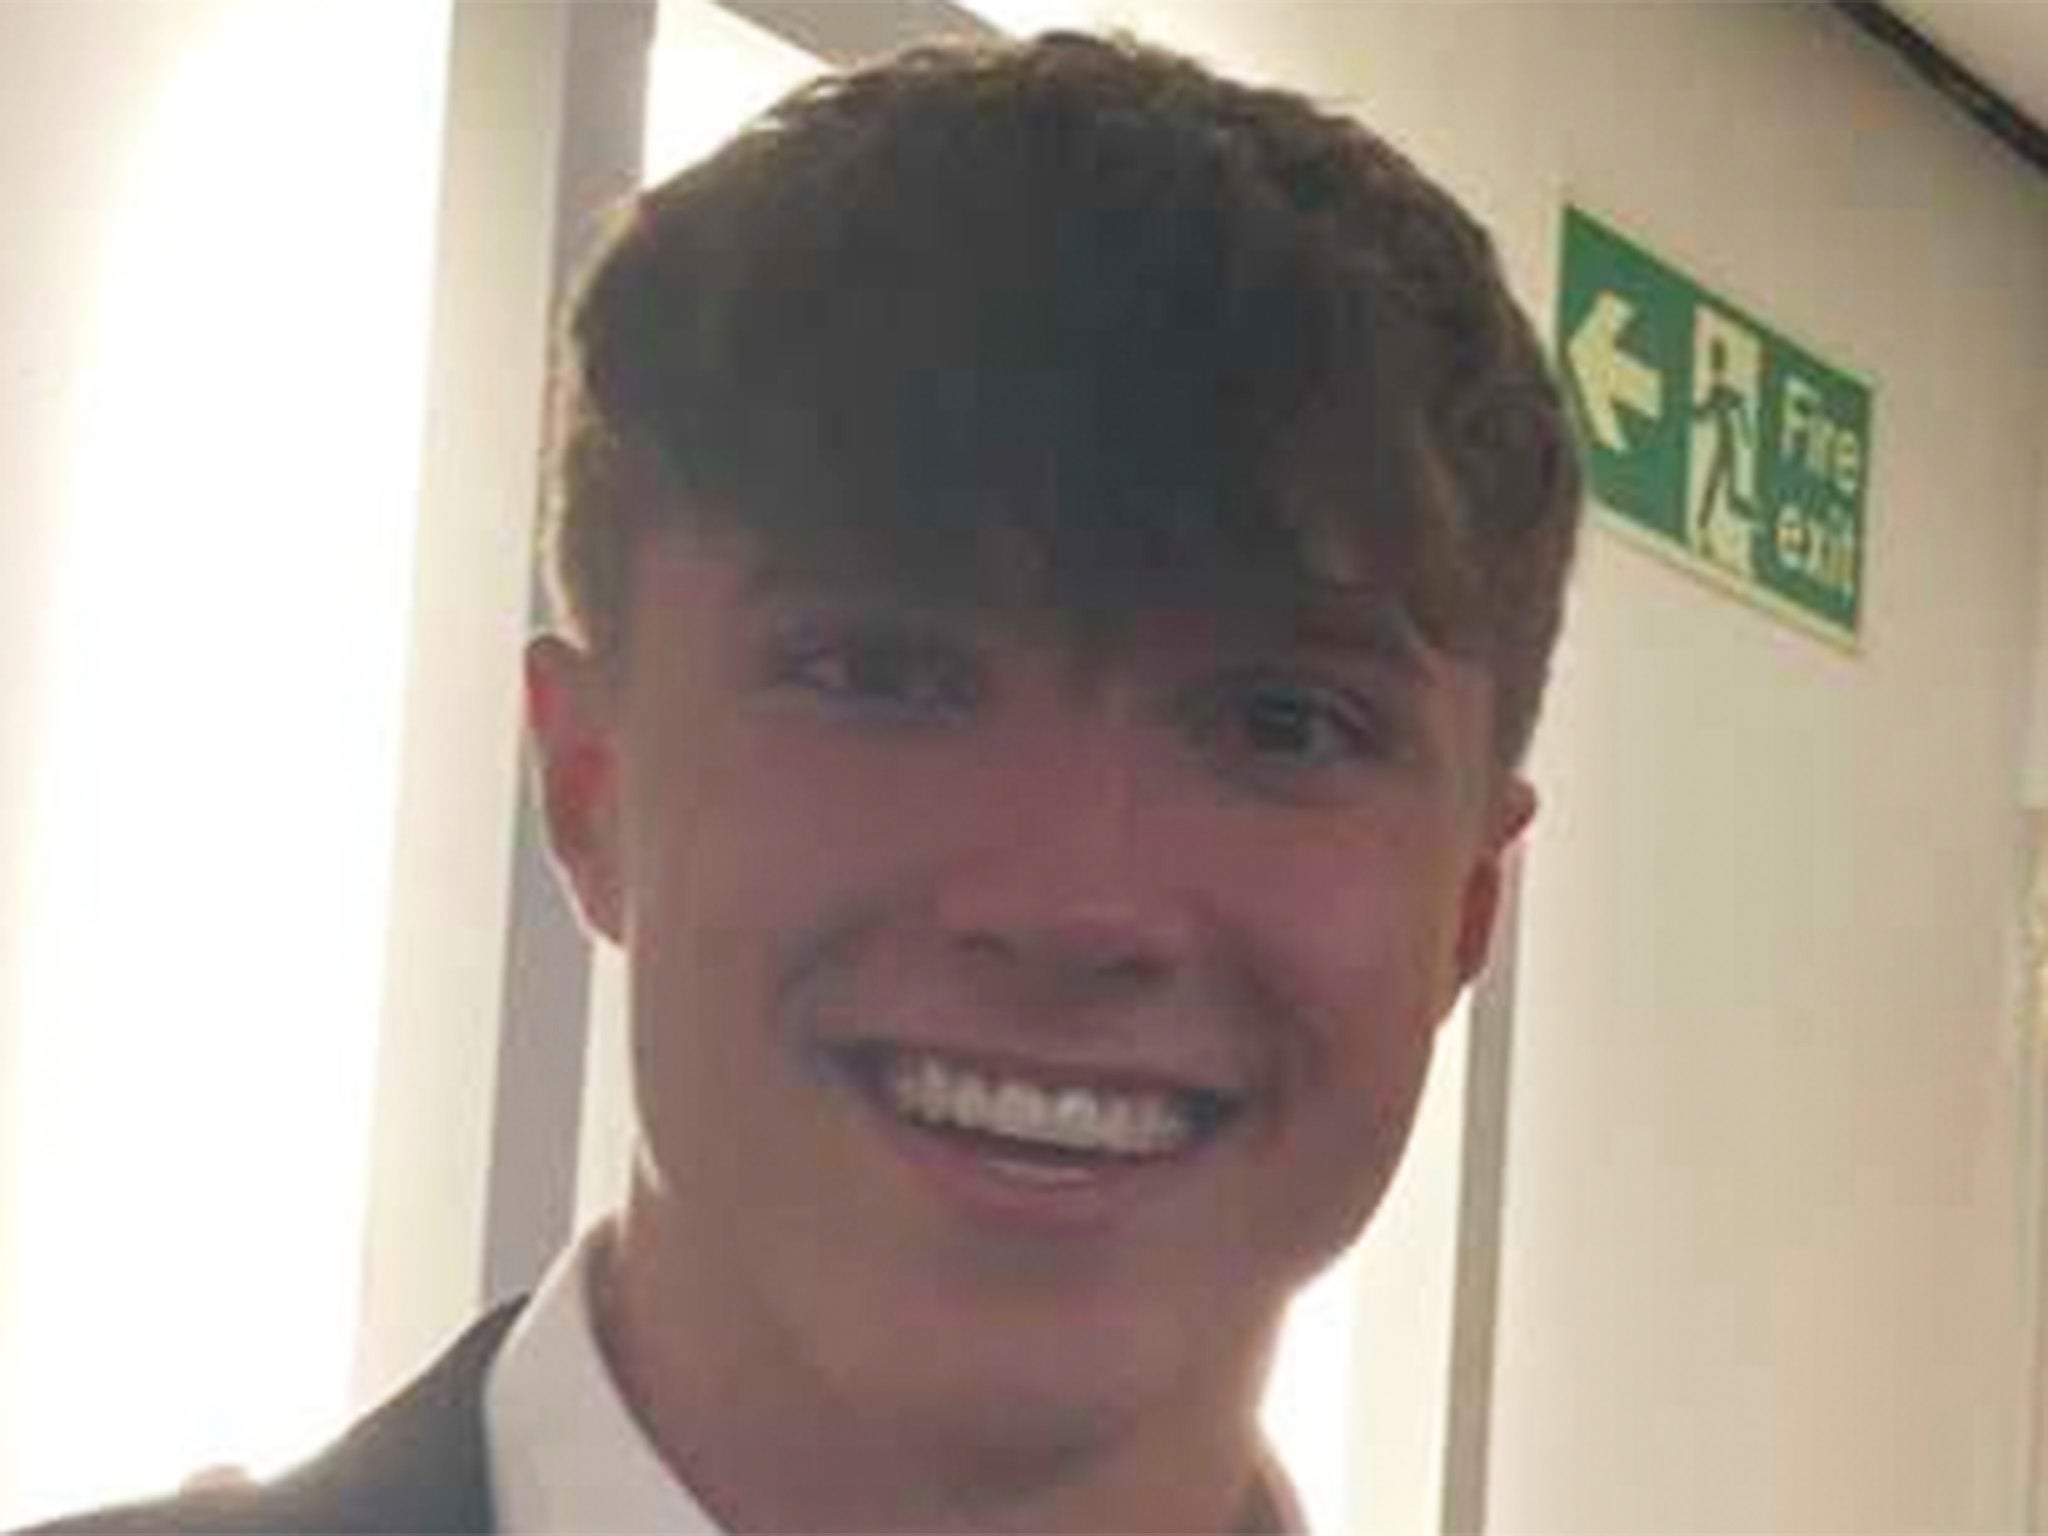 Barnaby Webber, 19, was named as one of the Nottingham attack victims